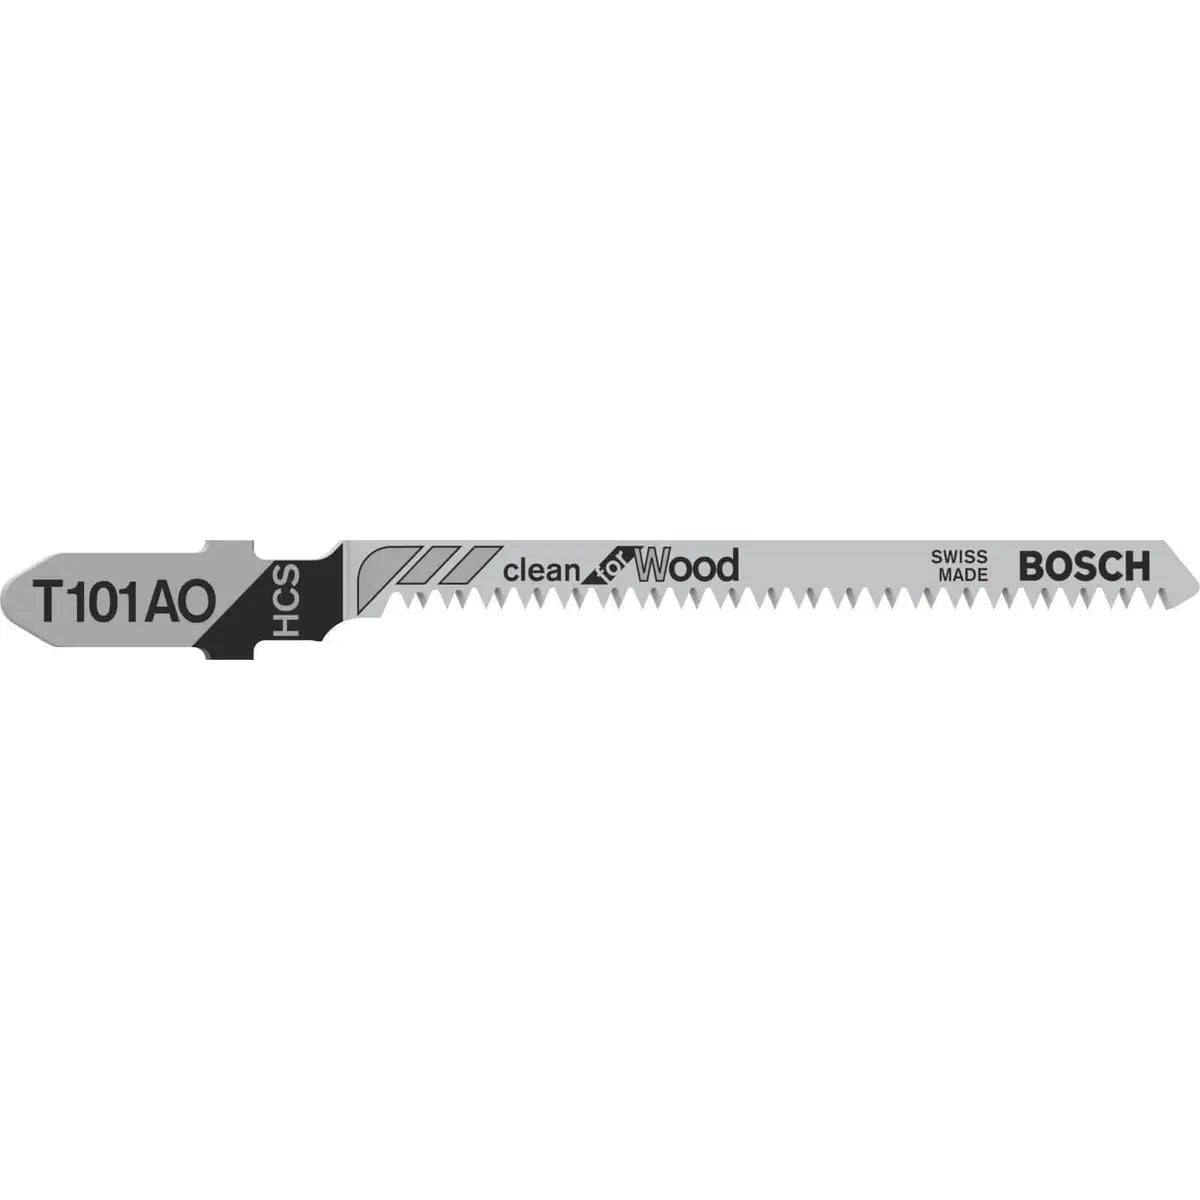 Bosch Jigsaw Blades T 101 AO Clean for Wood 3 Pack 2608630559 Power Tool Services